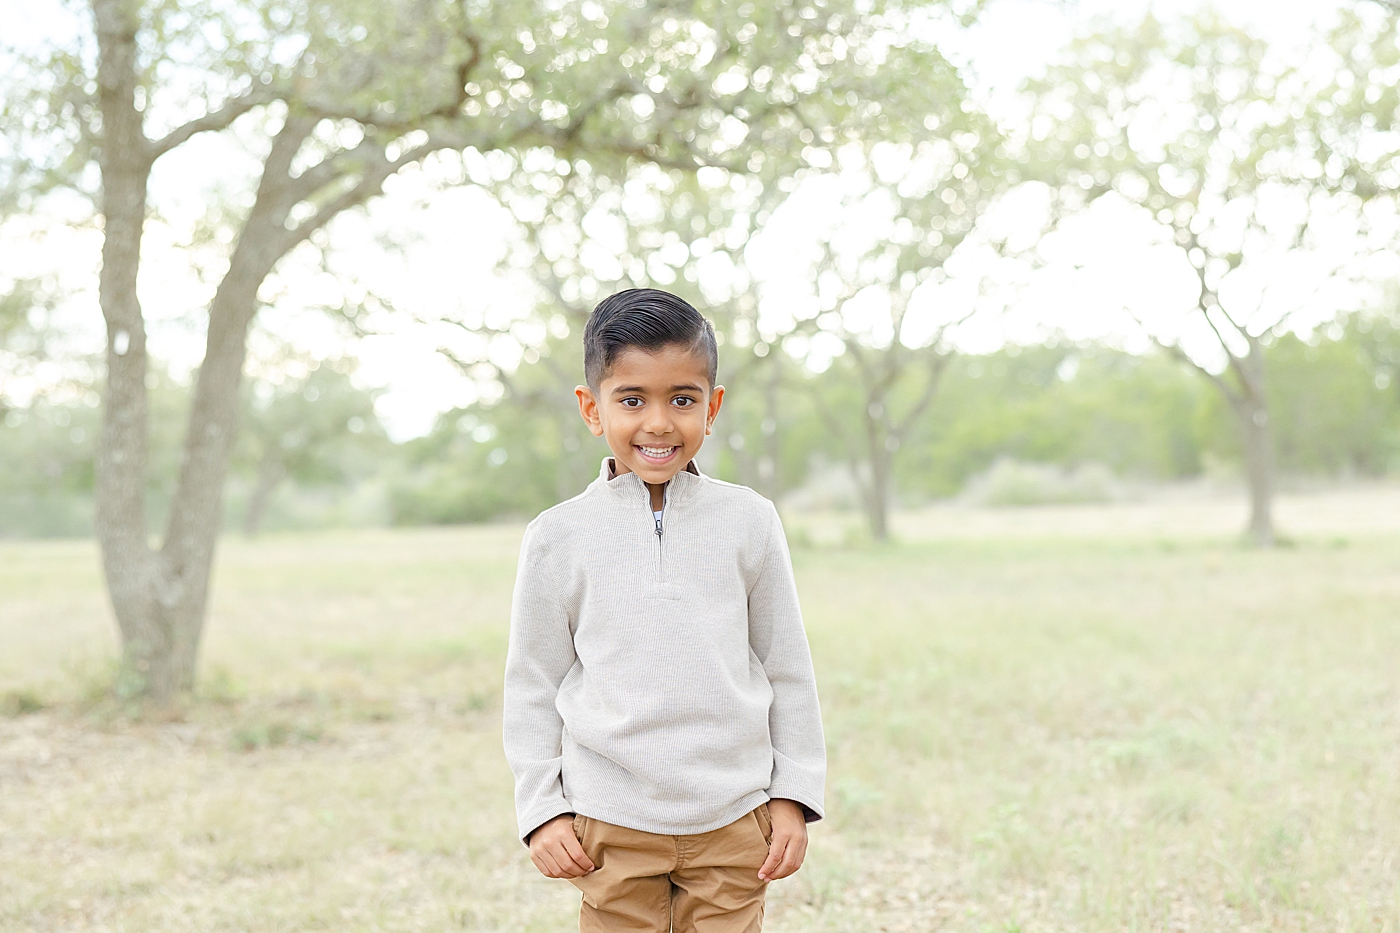 Little boy posing in the park | Image by Sana Ahmed Photography